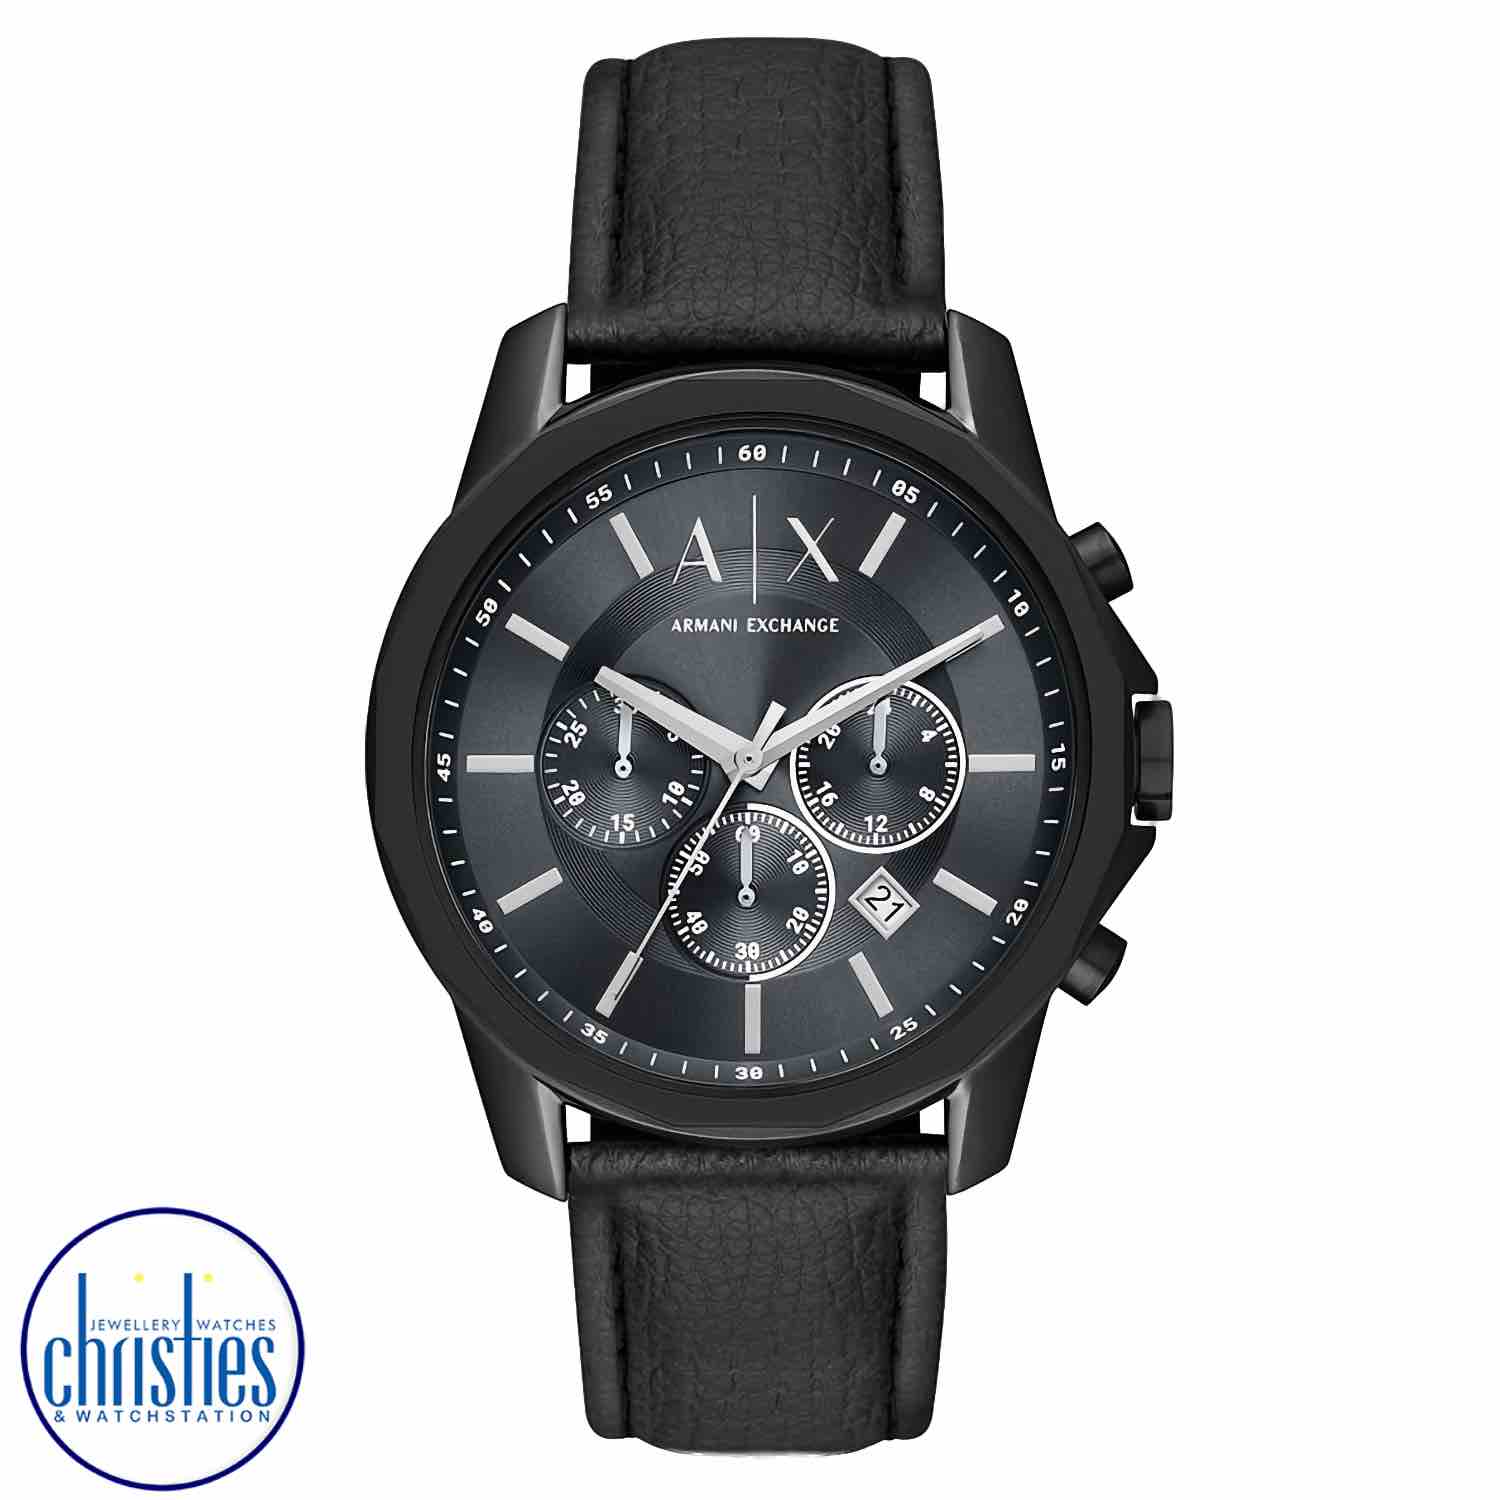 AX1724 A|X Armani Exchange Chronograph Black Leather Watch. AX1724 A|X Armani Exchange Chronograph Black Leather WatchLAYBUY - Pay it easy, in 6 weekly payments and have it now.